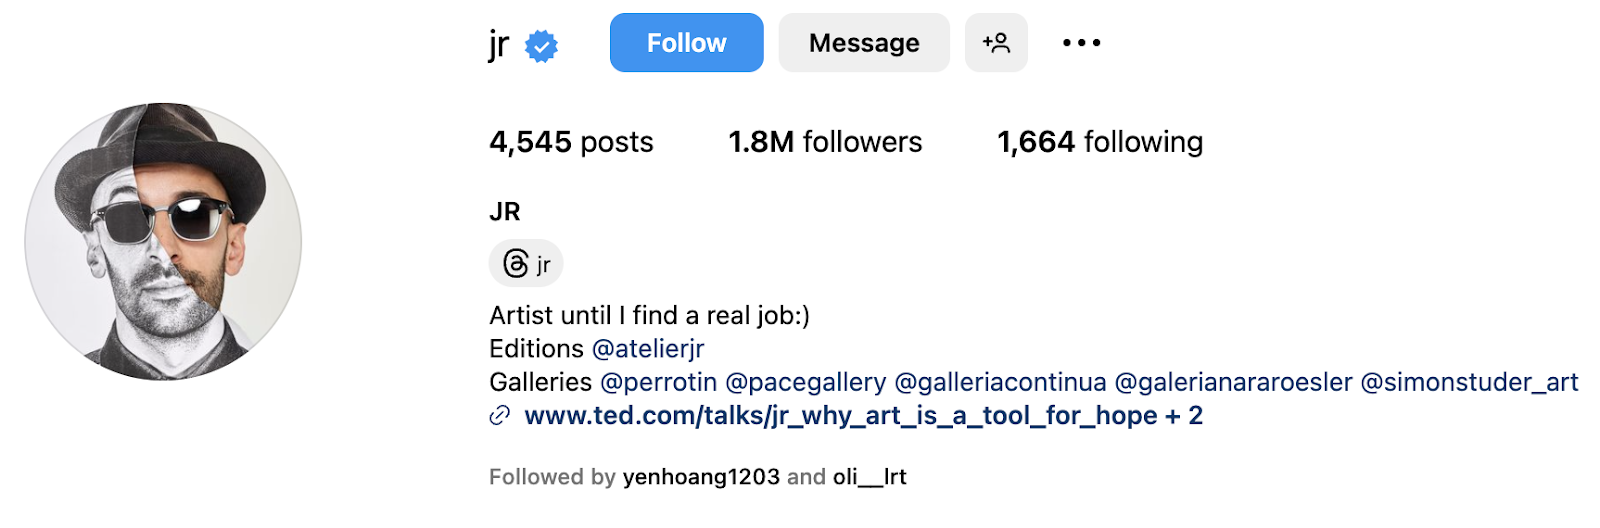 Screenshot of the Instagram profile of JR, a famous french artist